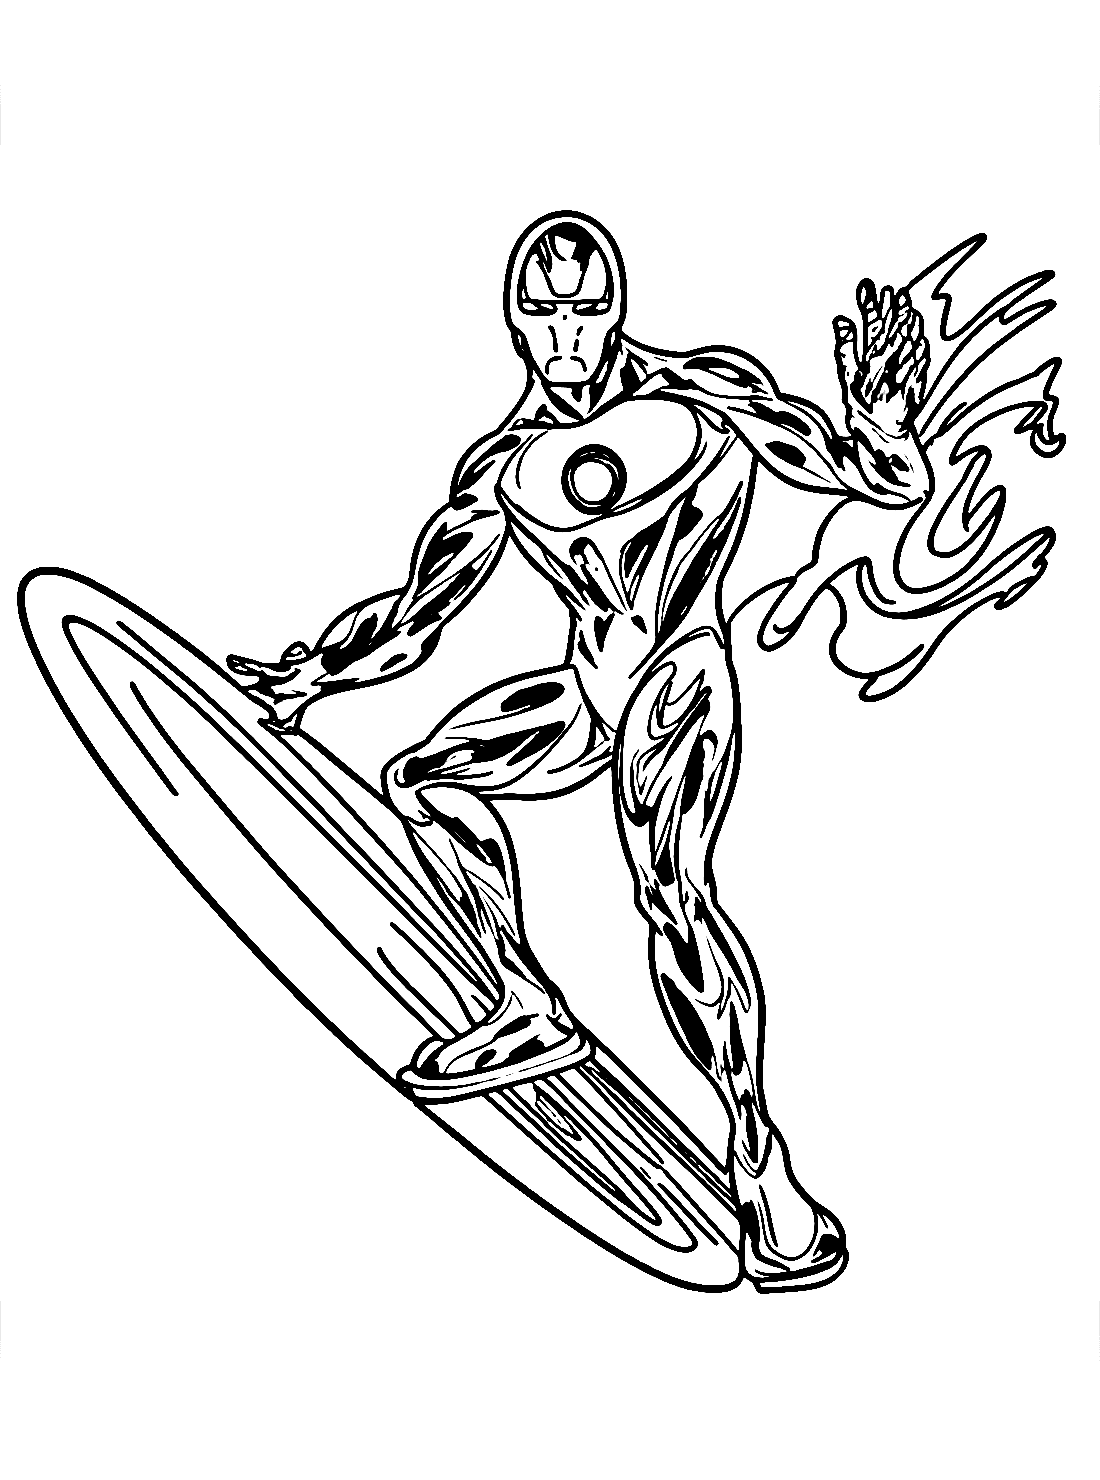 Rise of the silver surfer